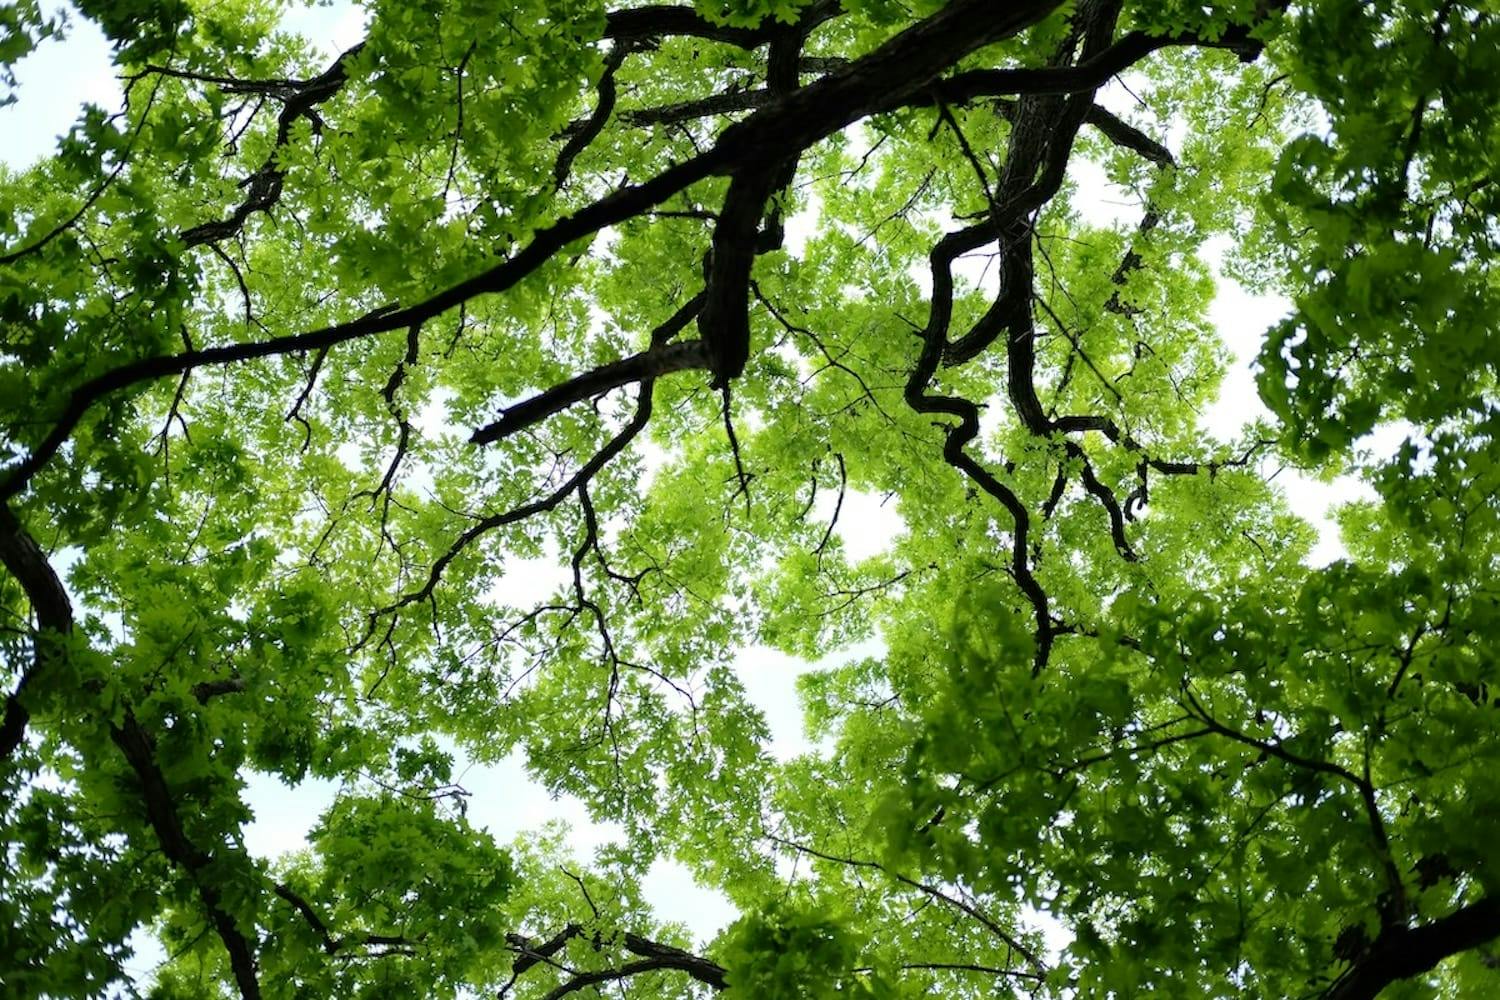 Image is looking up at a forest tree canopy. 